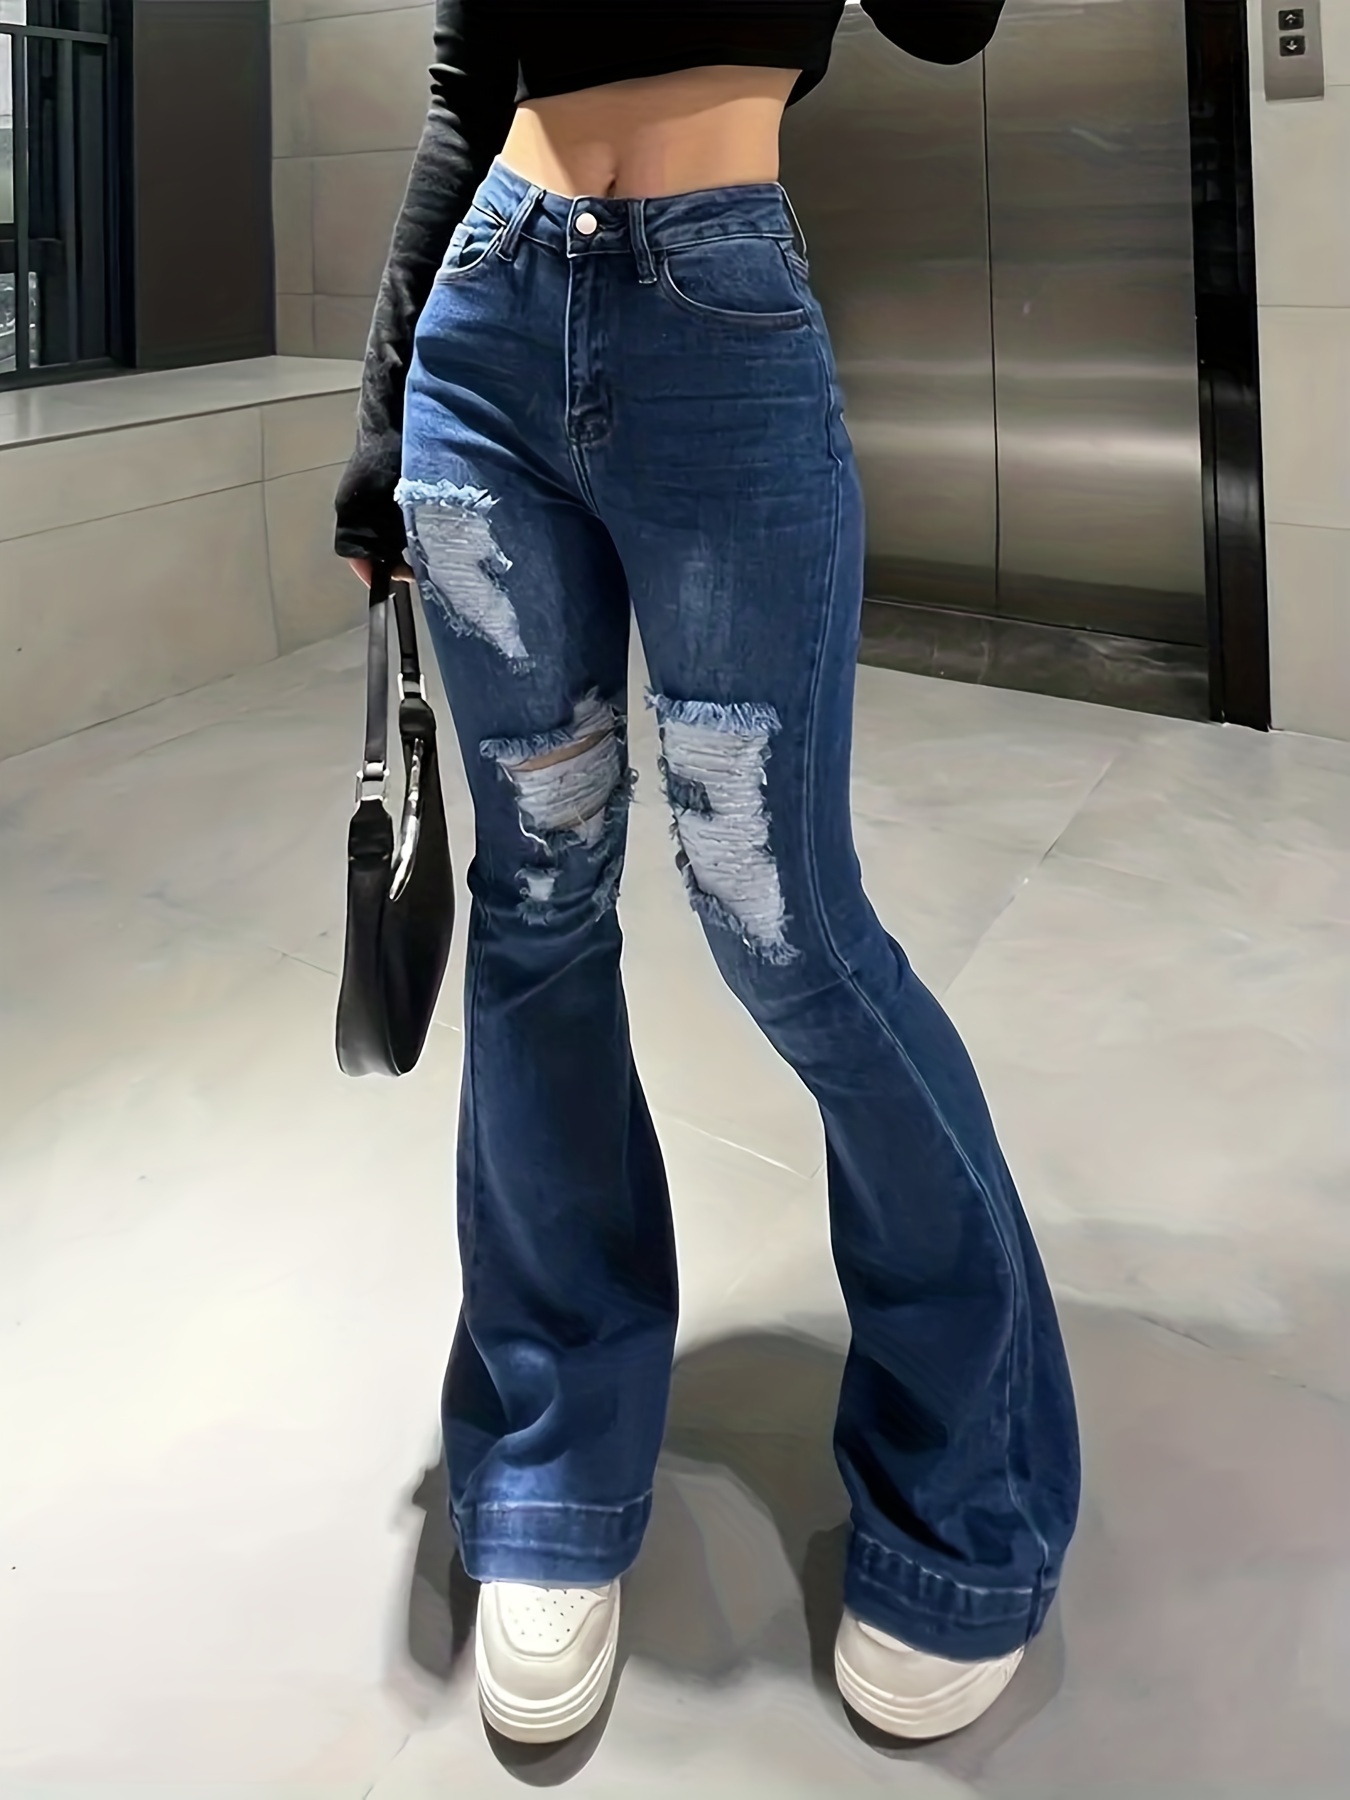 Blue Ripped Holes Flare Jeans, Distressed *-Stretch Slant Pockets Bell  Bottom Jeans, Women's Denim Jeans & Clothing